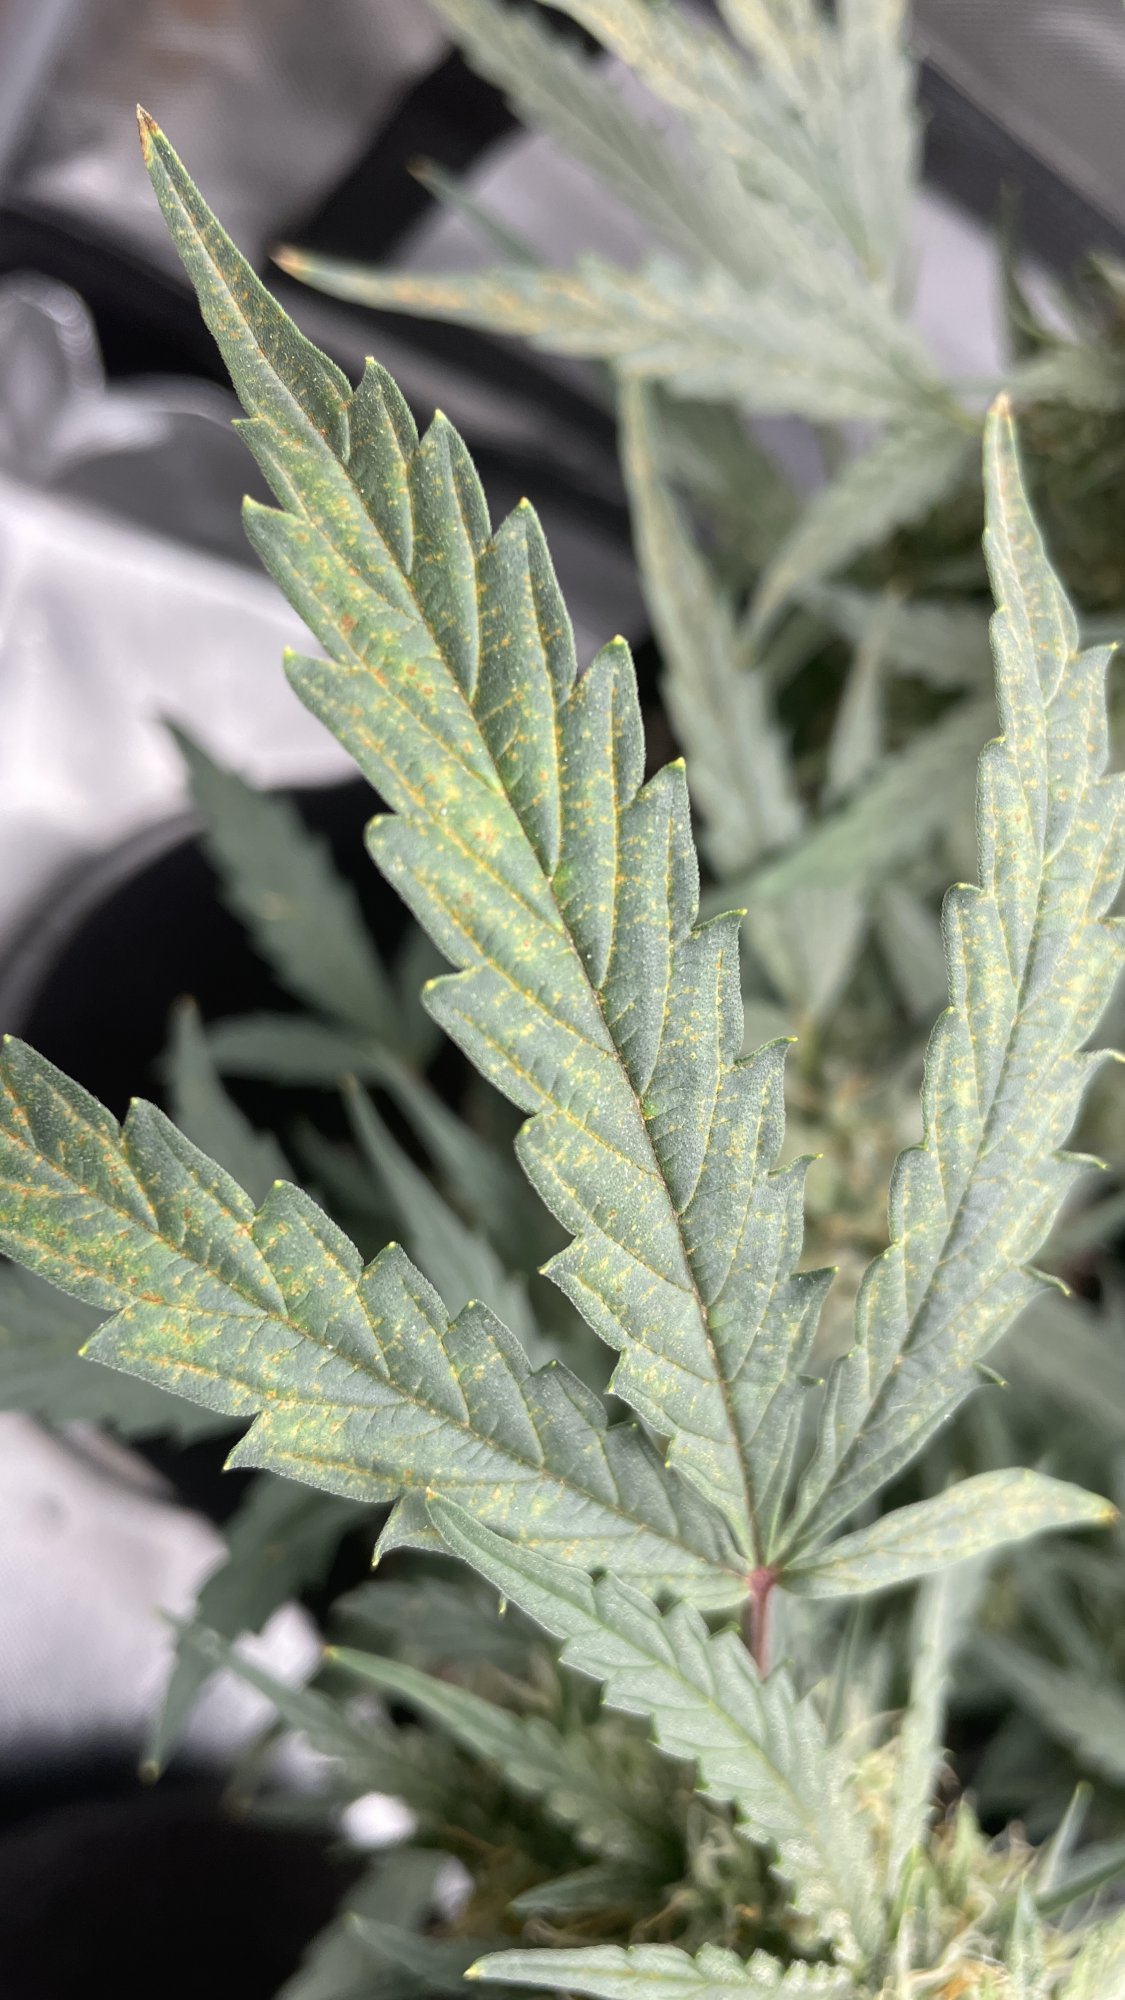 Problems with autoflower during flowering 2